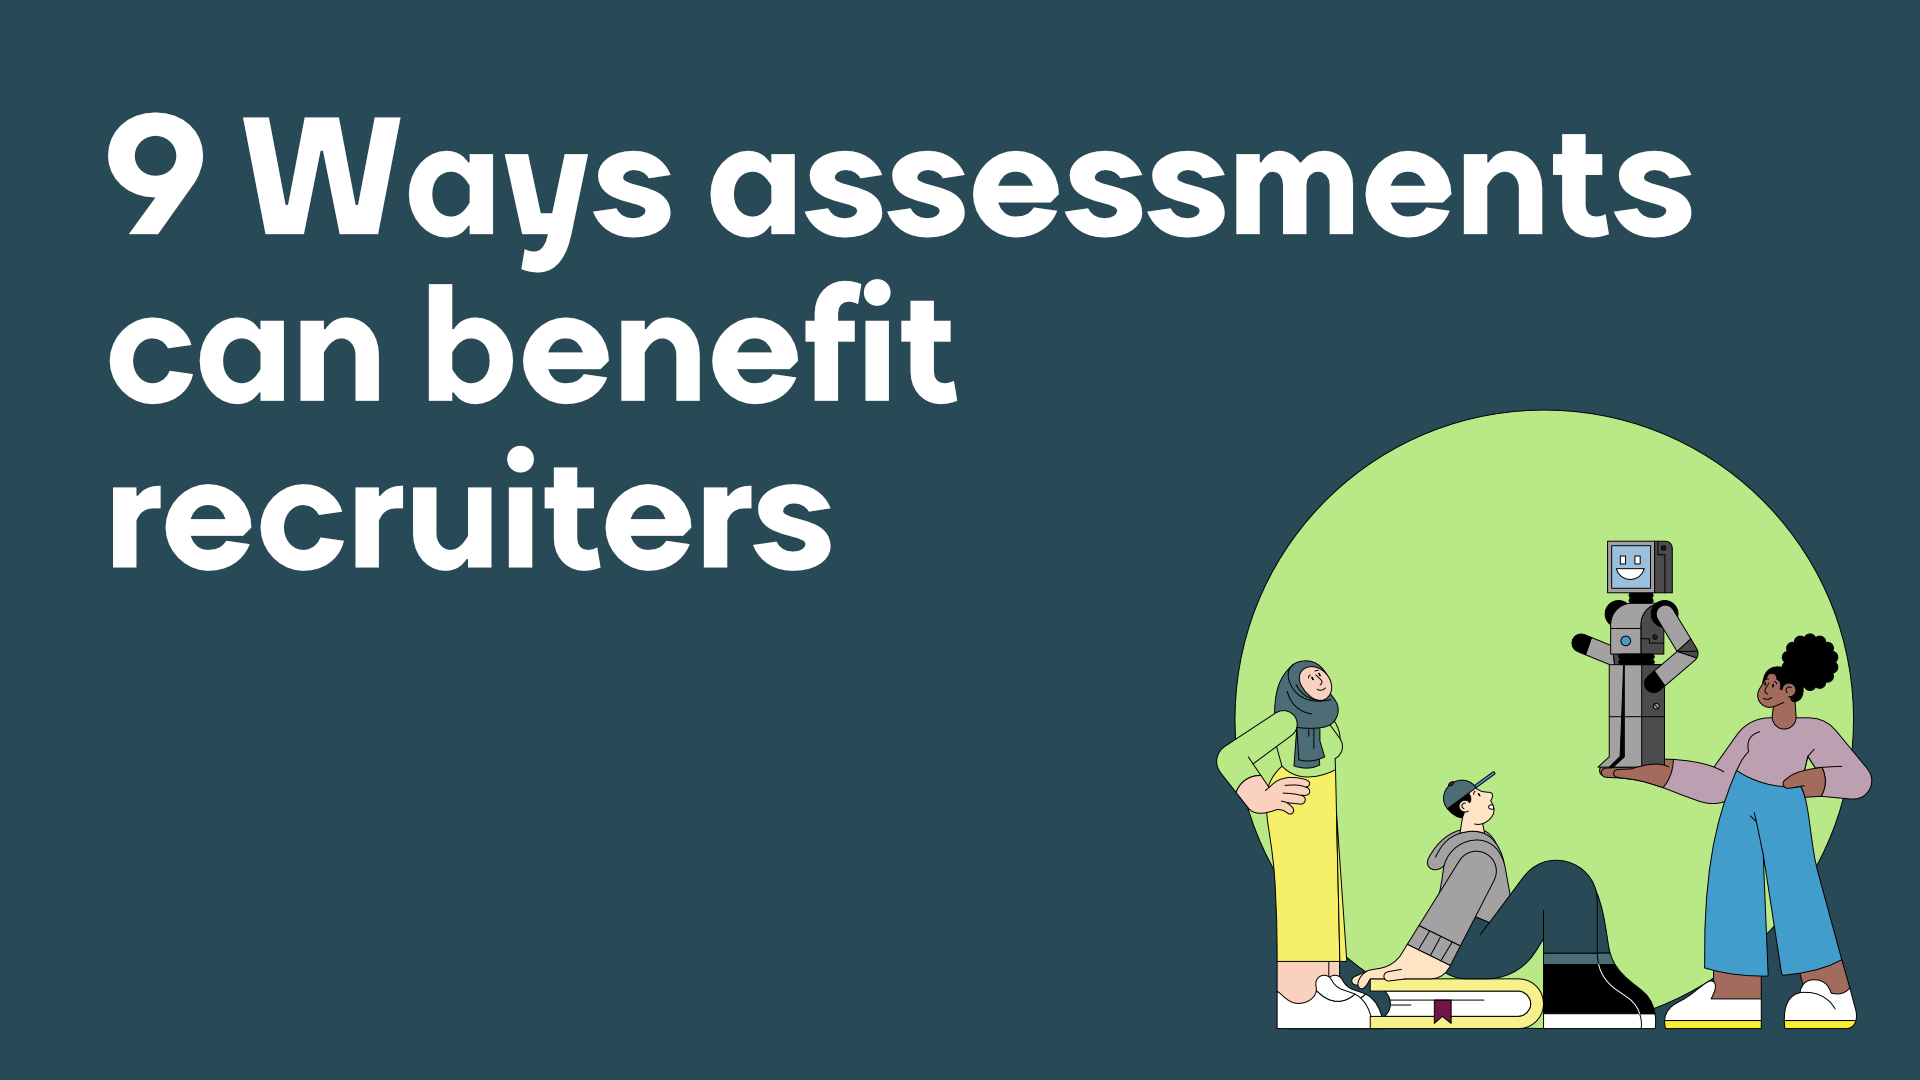 9 Ways assessments benefit recruiters